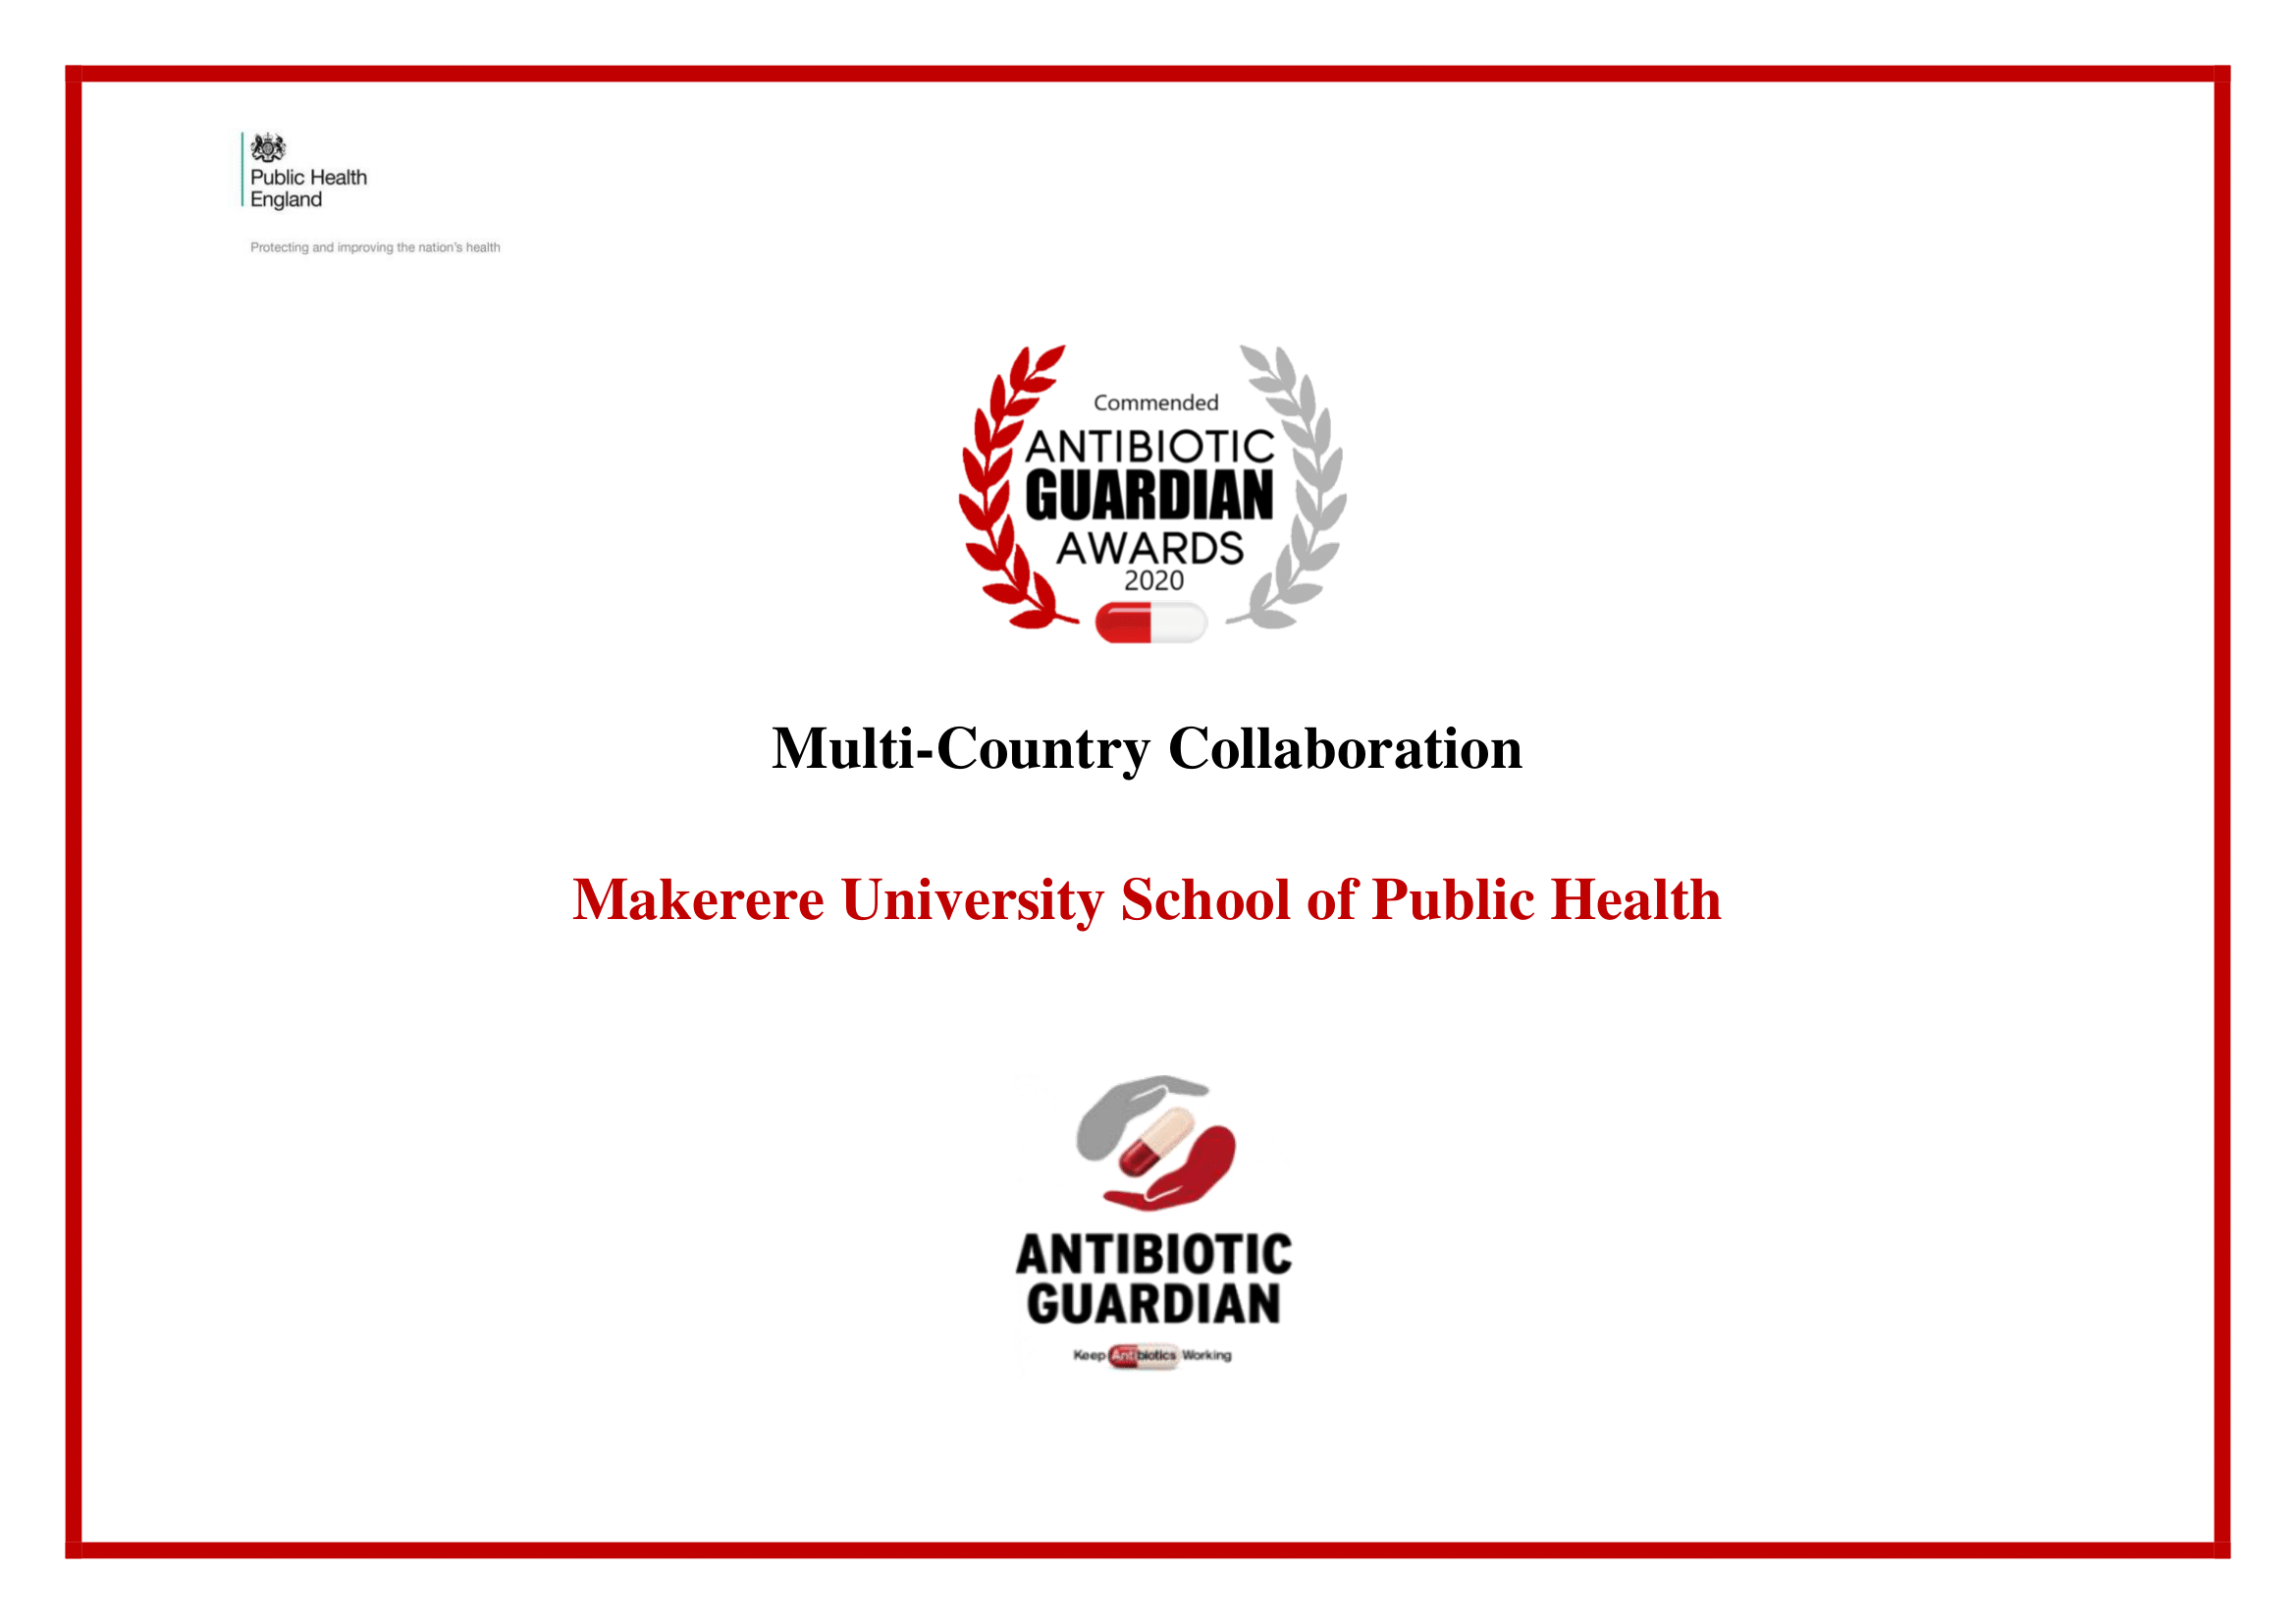 Multi-Country Collaboration certificate commending MakSHP for its role in supporting Antimicrobial Stewardship in Uganda in 